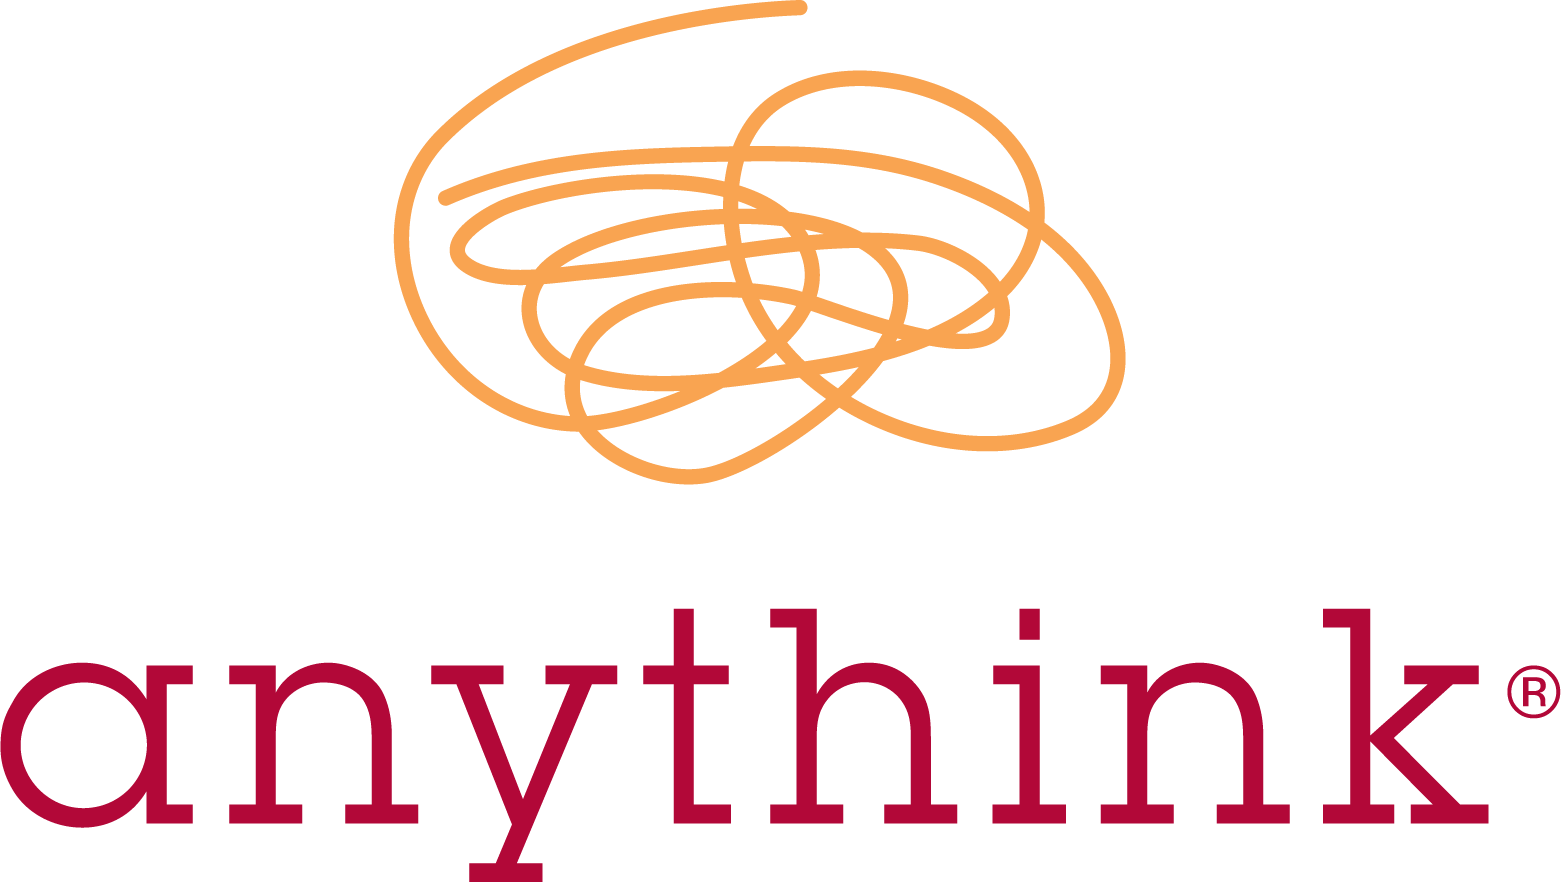 The official Anythink logo.